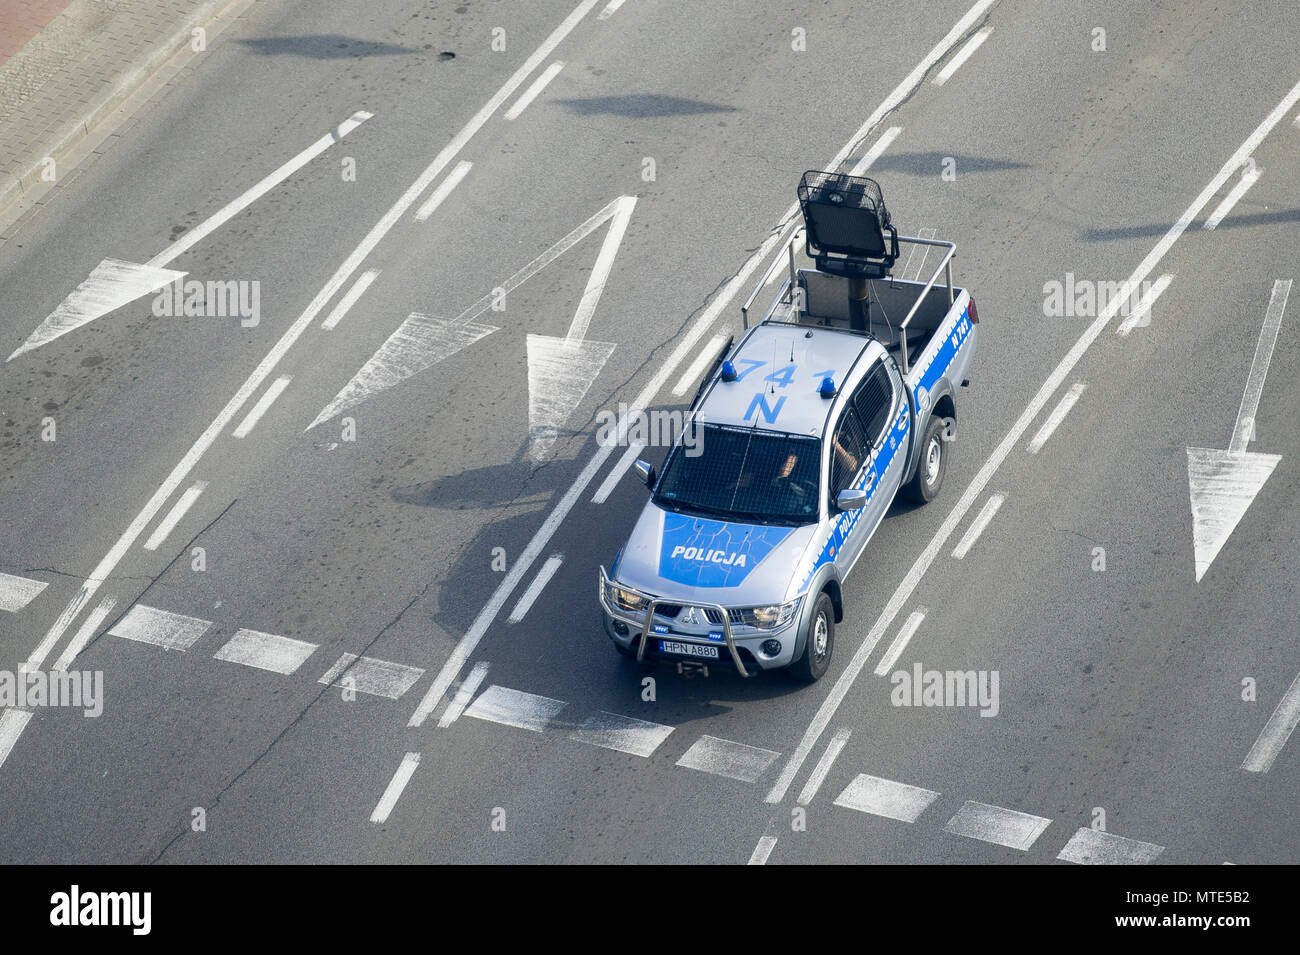 Polish police car Mitsubishi L200 with LRAD 500X (Long Range Acoustic Device is an acoustic hailing device used for non-lethal, non-kinetic crowd cont Stock Photo